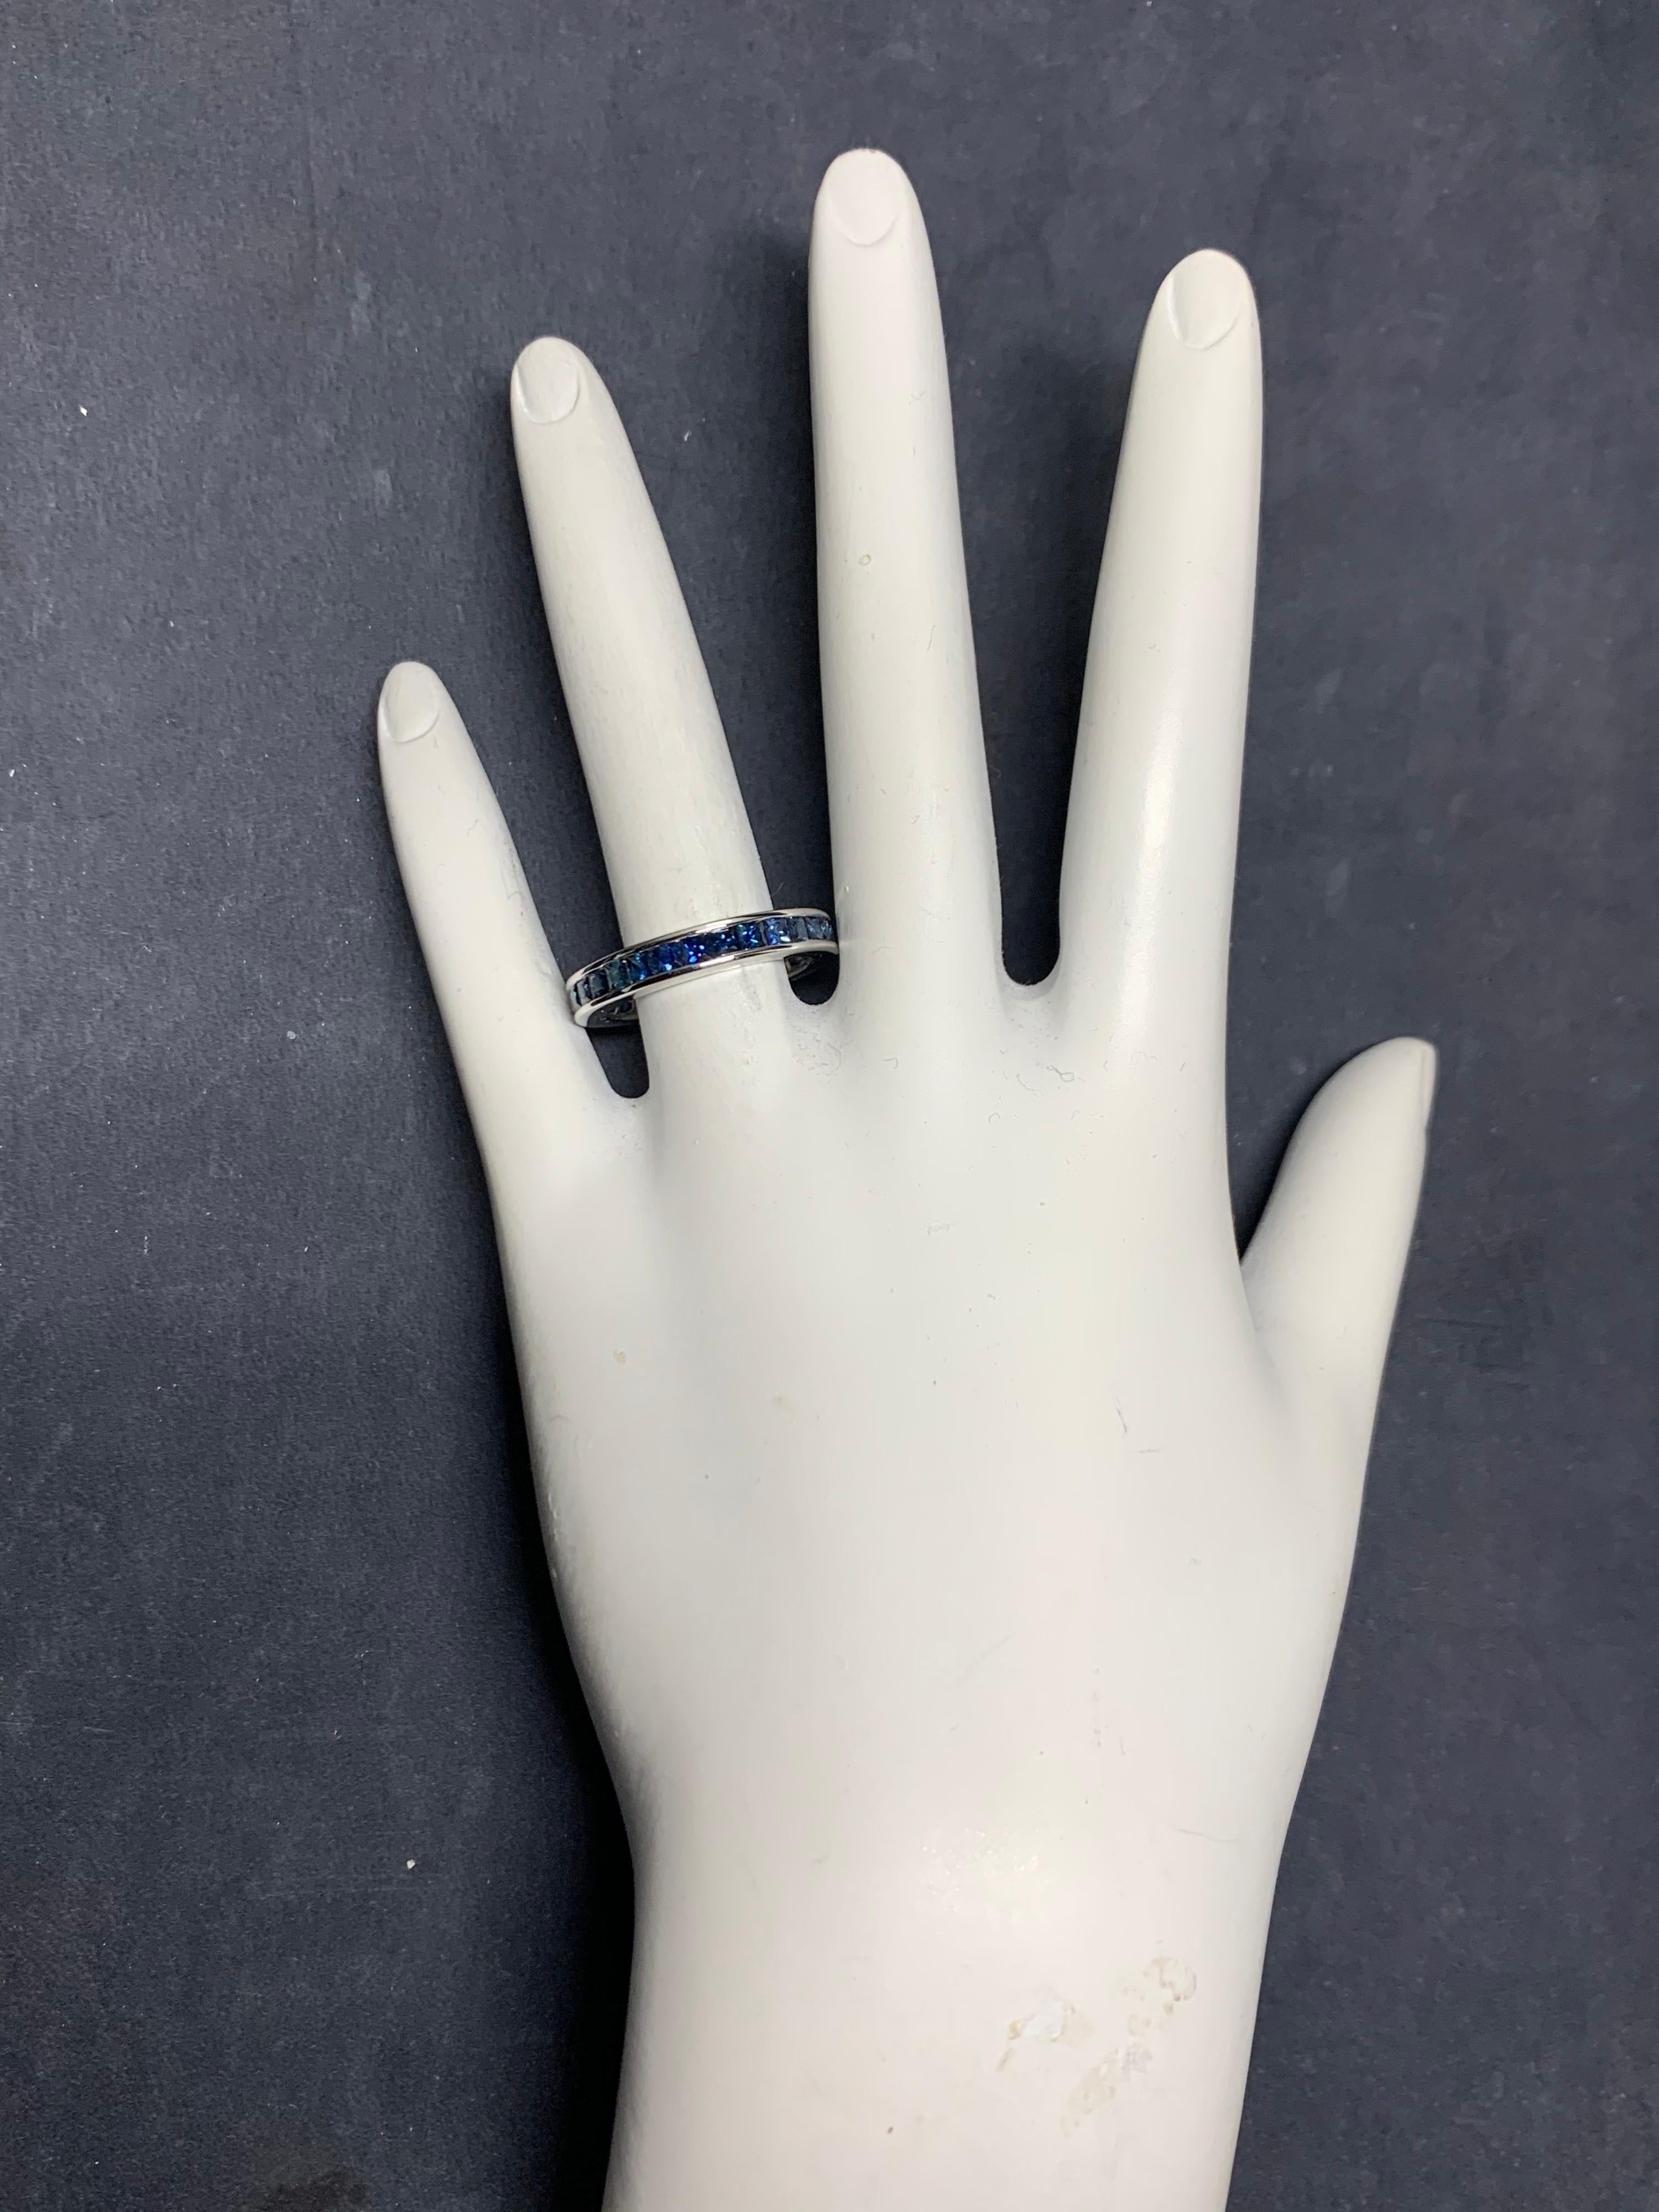 Modern 14k White Gold Eternity Band set with 2.25 Carats Natural Blue Sapphires. 

The ring is a size 7.25, width 3.7mm, weighs 3.59 grams.
